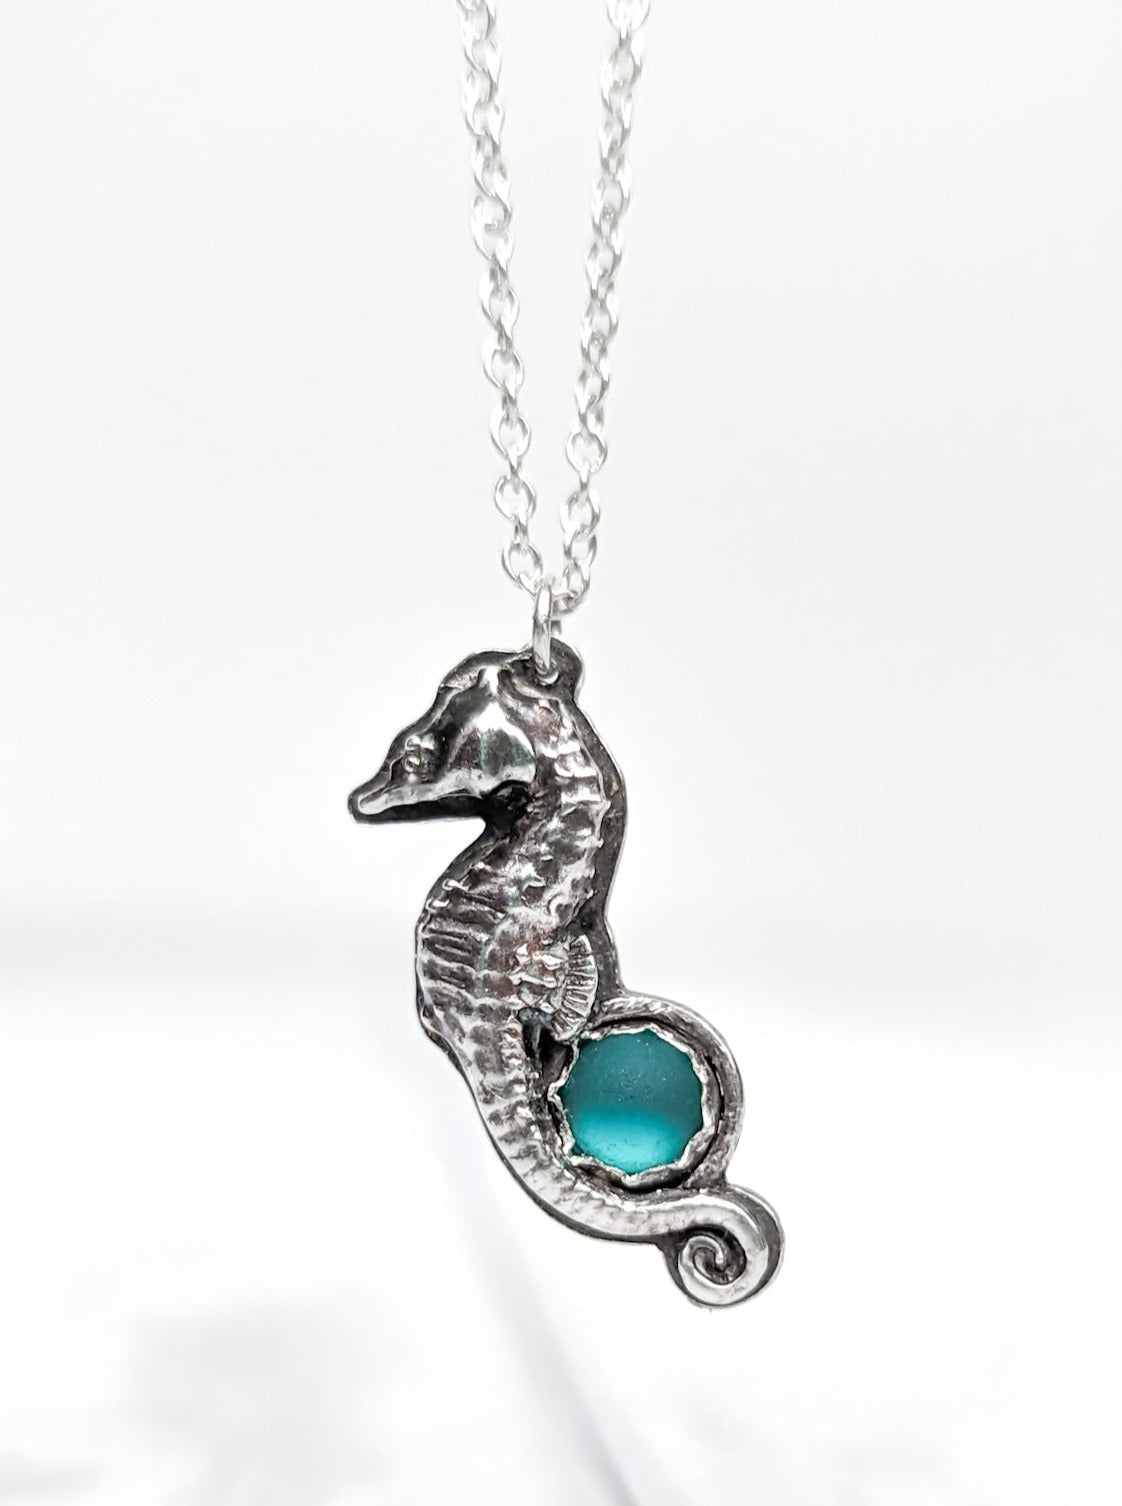 Turquoise beach glass pendanr with silver seahorse